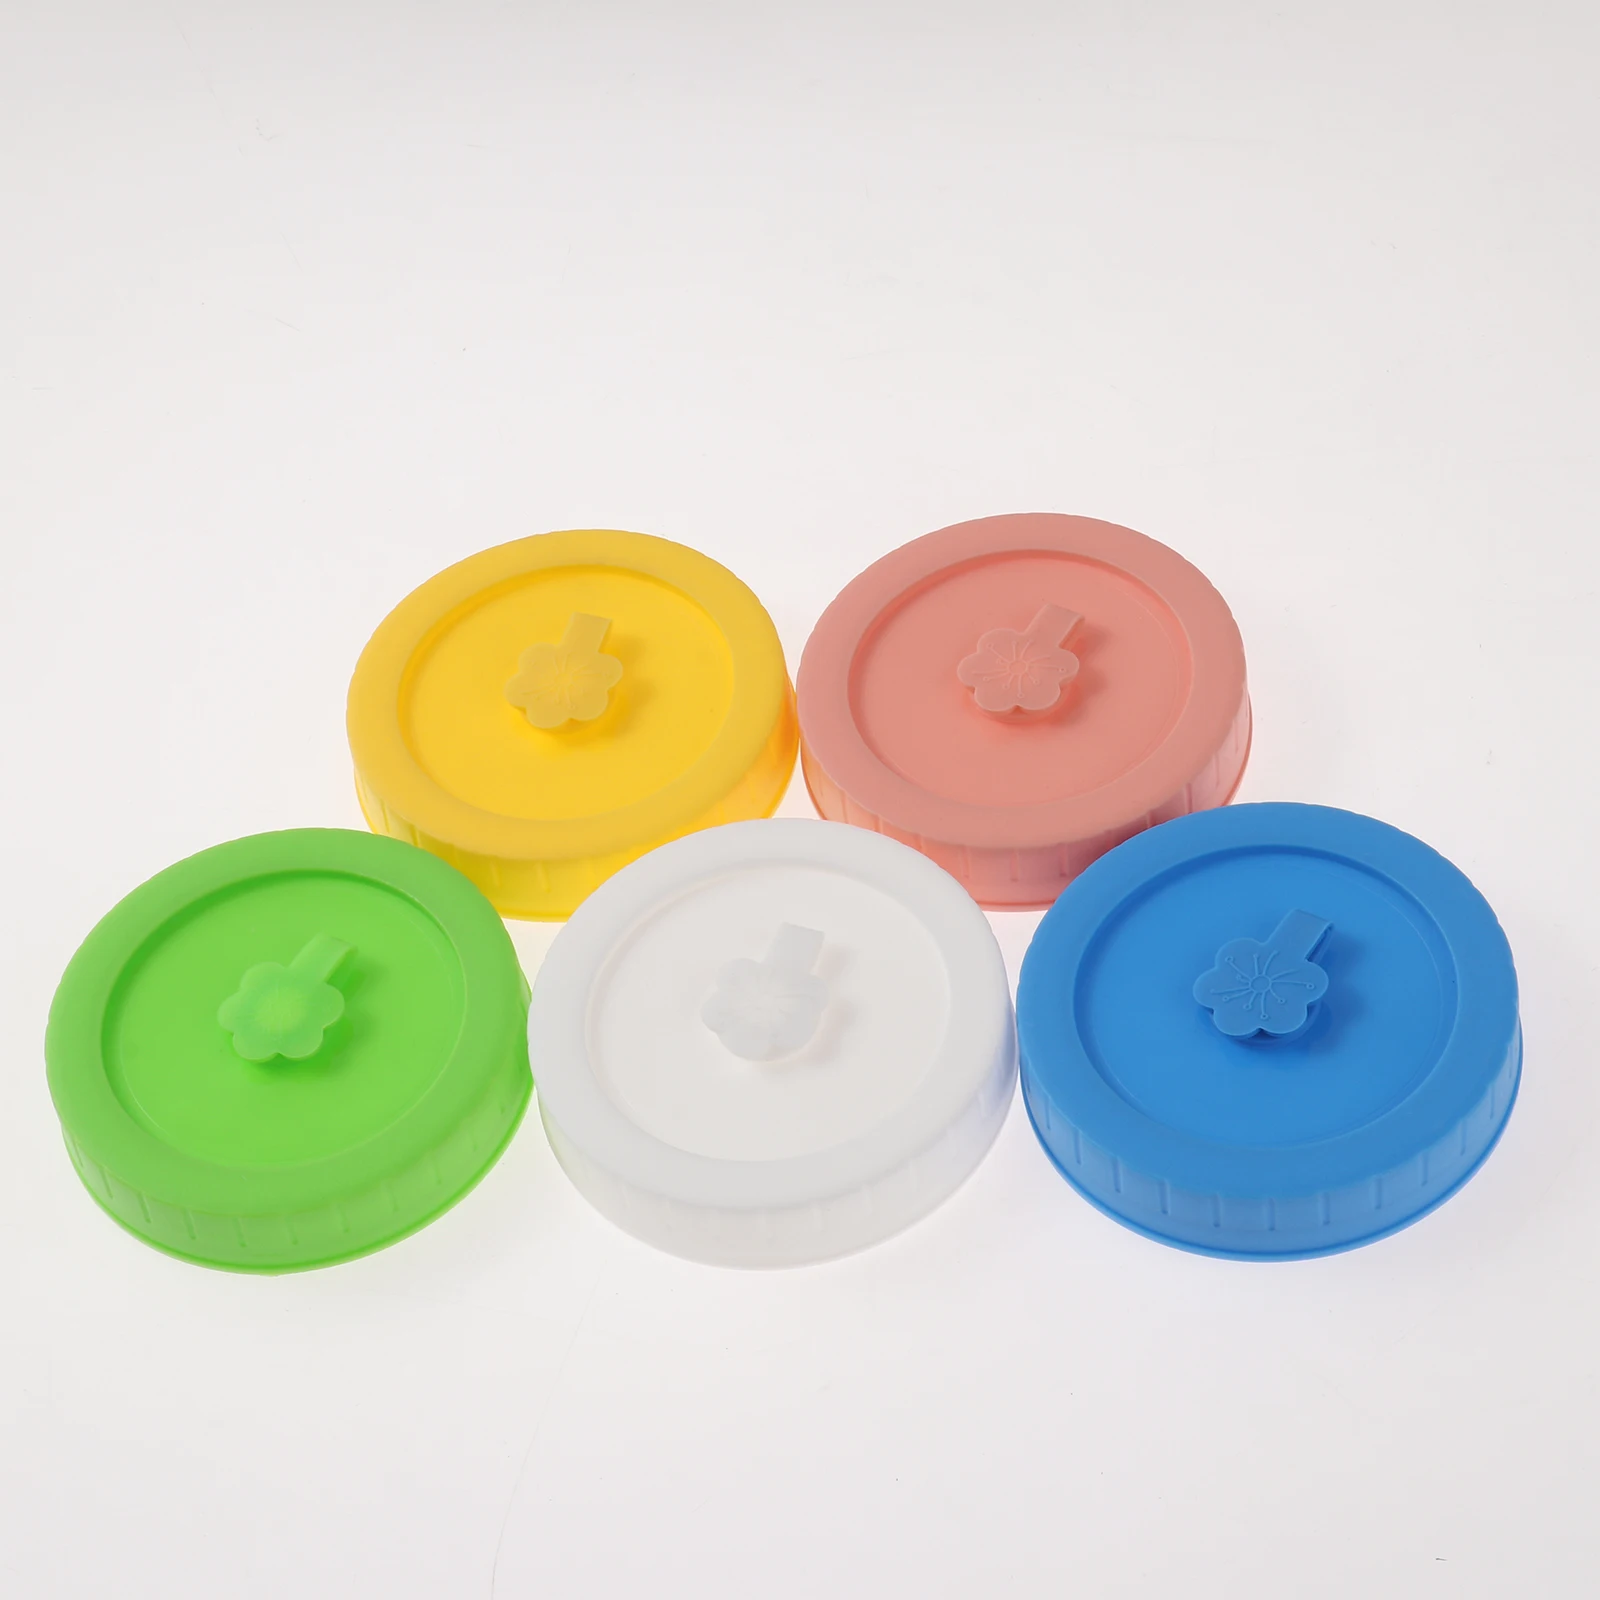 5Pcs 86mm Plastic Straw Lids Mason Canning Jar Covers with Straw Hole Plum-Shaped Silicone Stopper Glass Bottle Jar Storage Caps